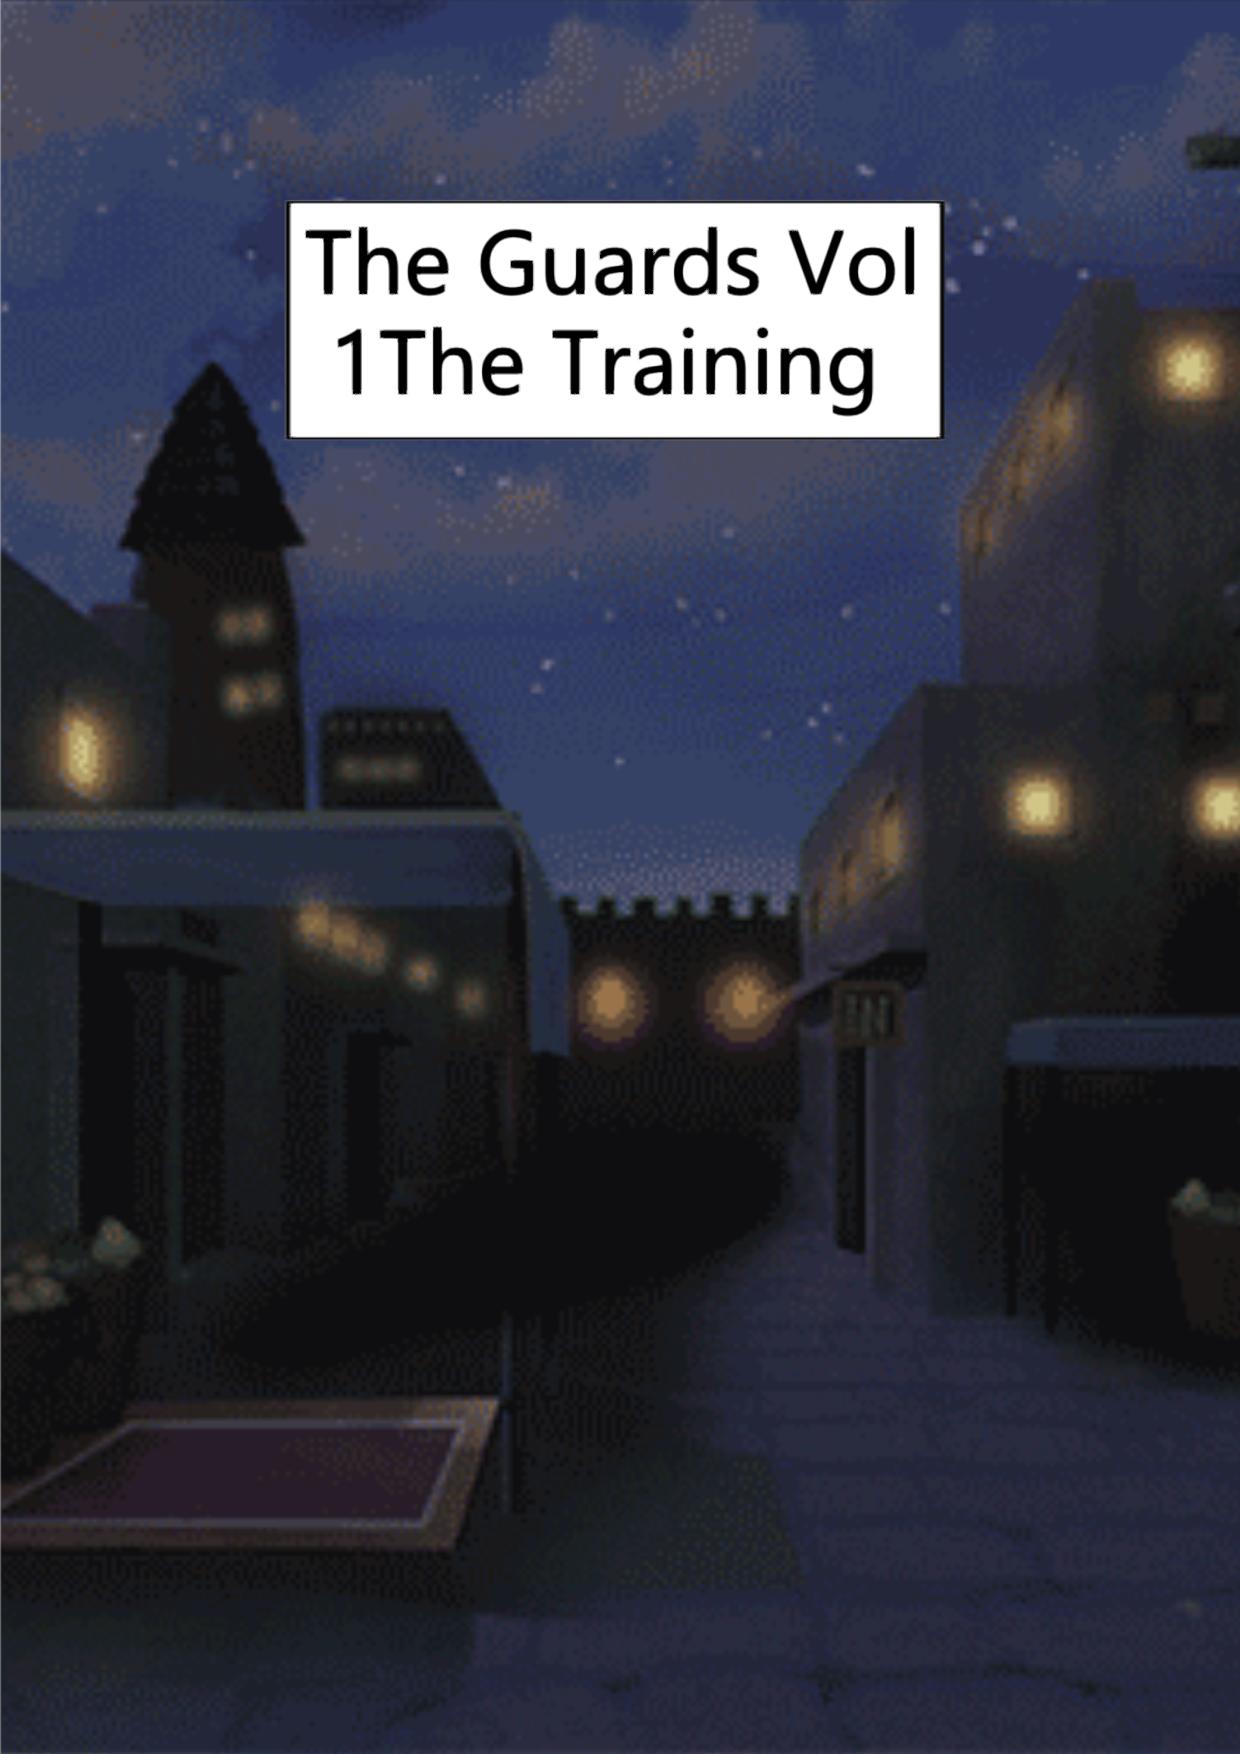 The Guards Vol 1 The Training